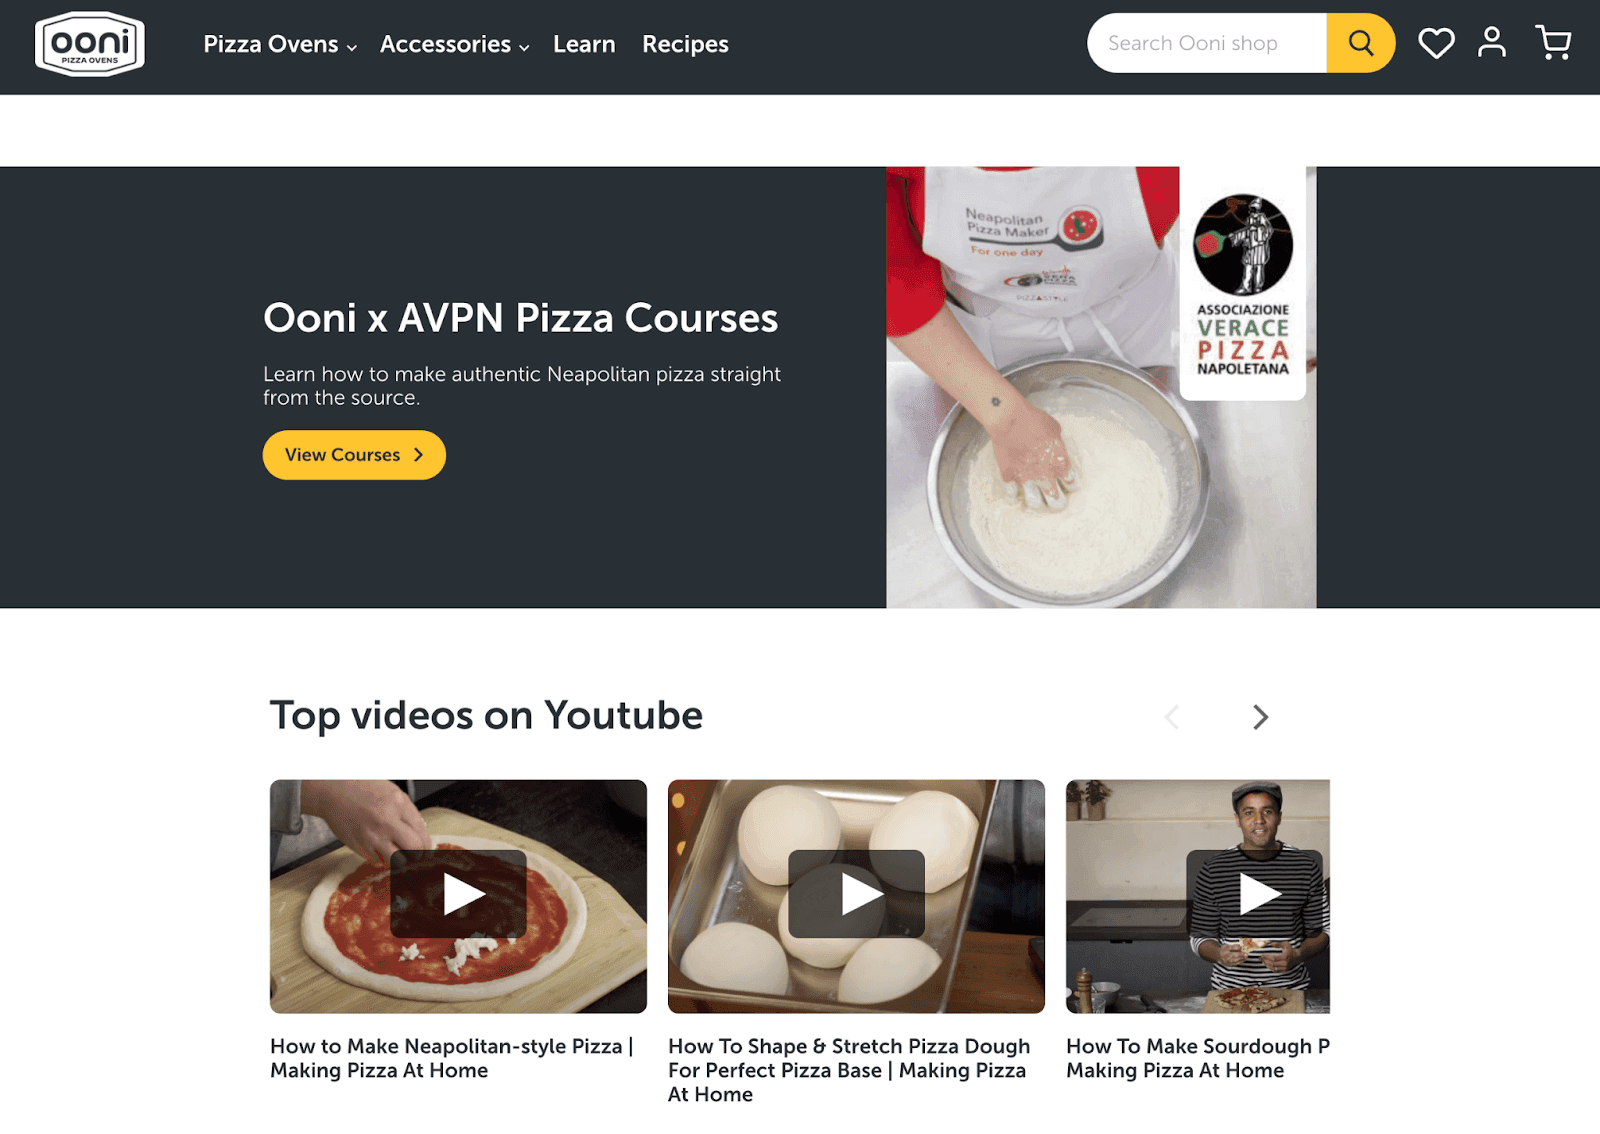 Ooni pizza oven website showing courses available online and videos on how to make pizzas.